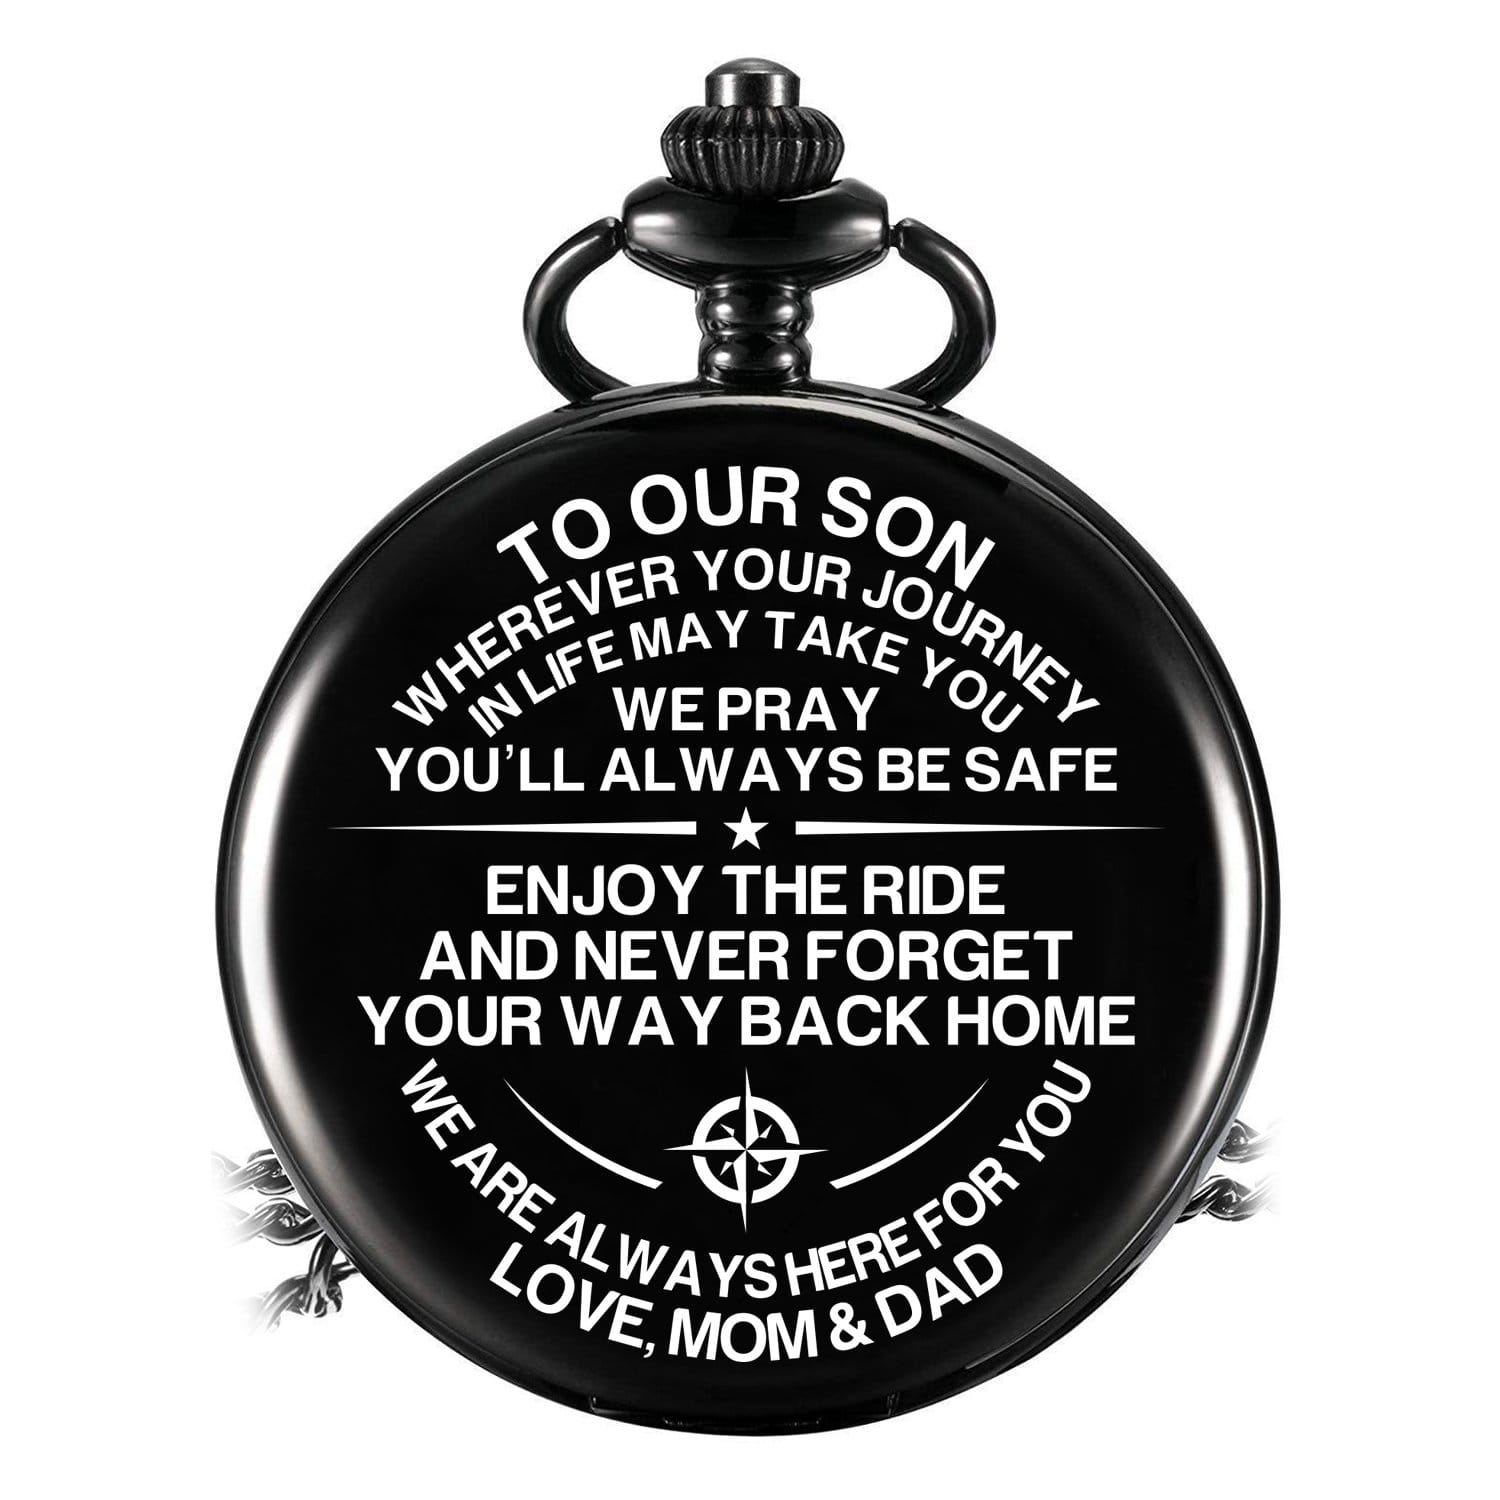 Pocket Watches To Our Son - Never Forget Your Way Back Home Pocket Watch GiveMe-Gifts